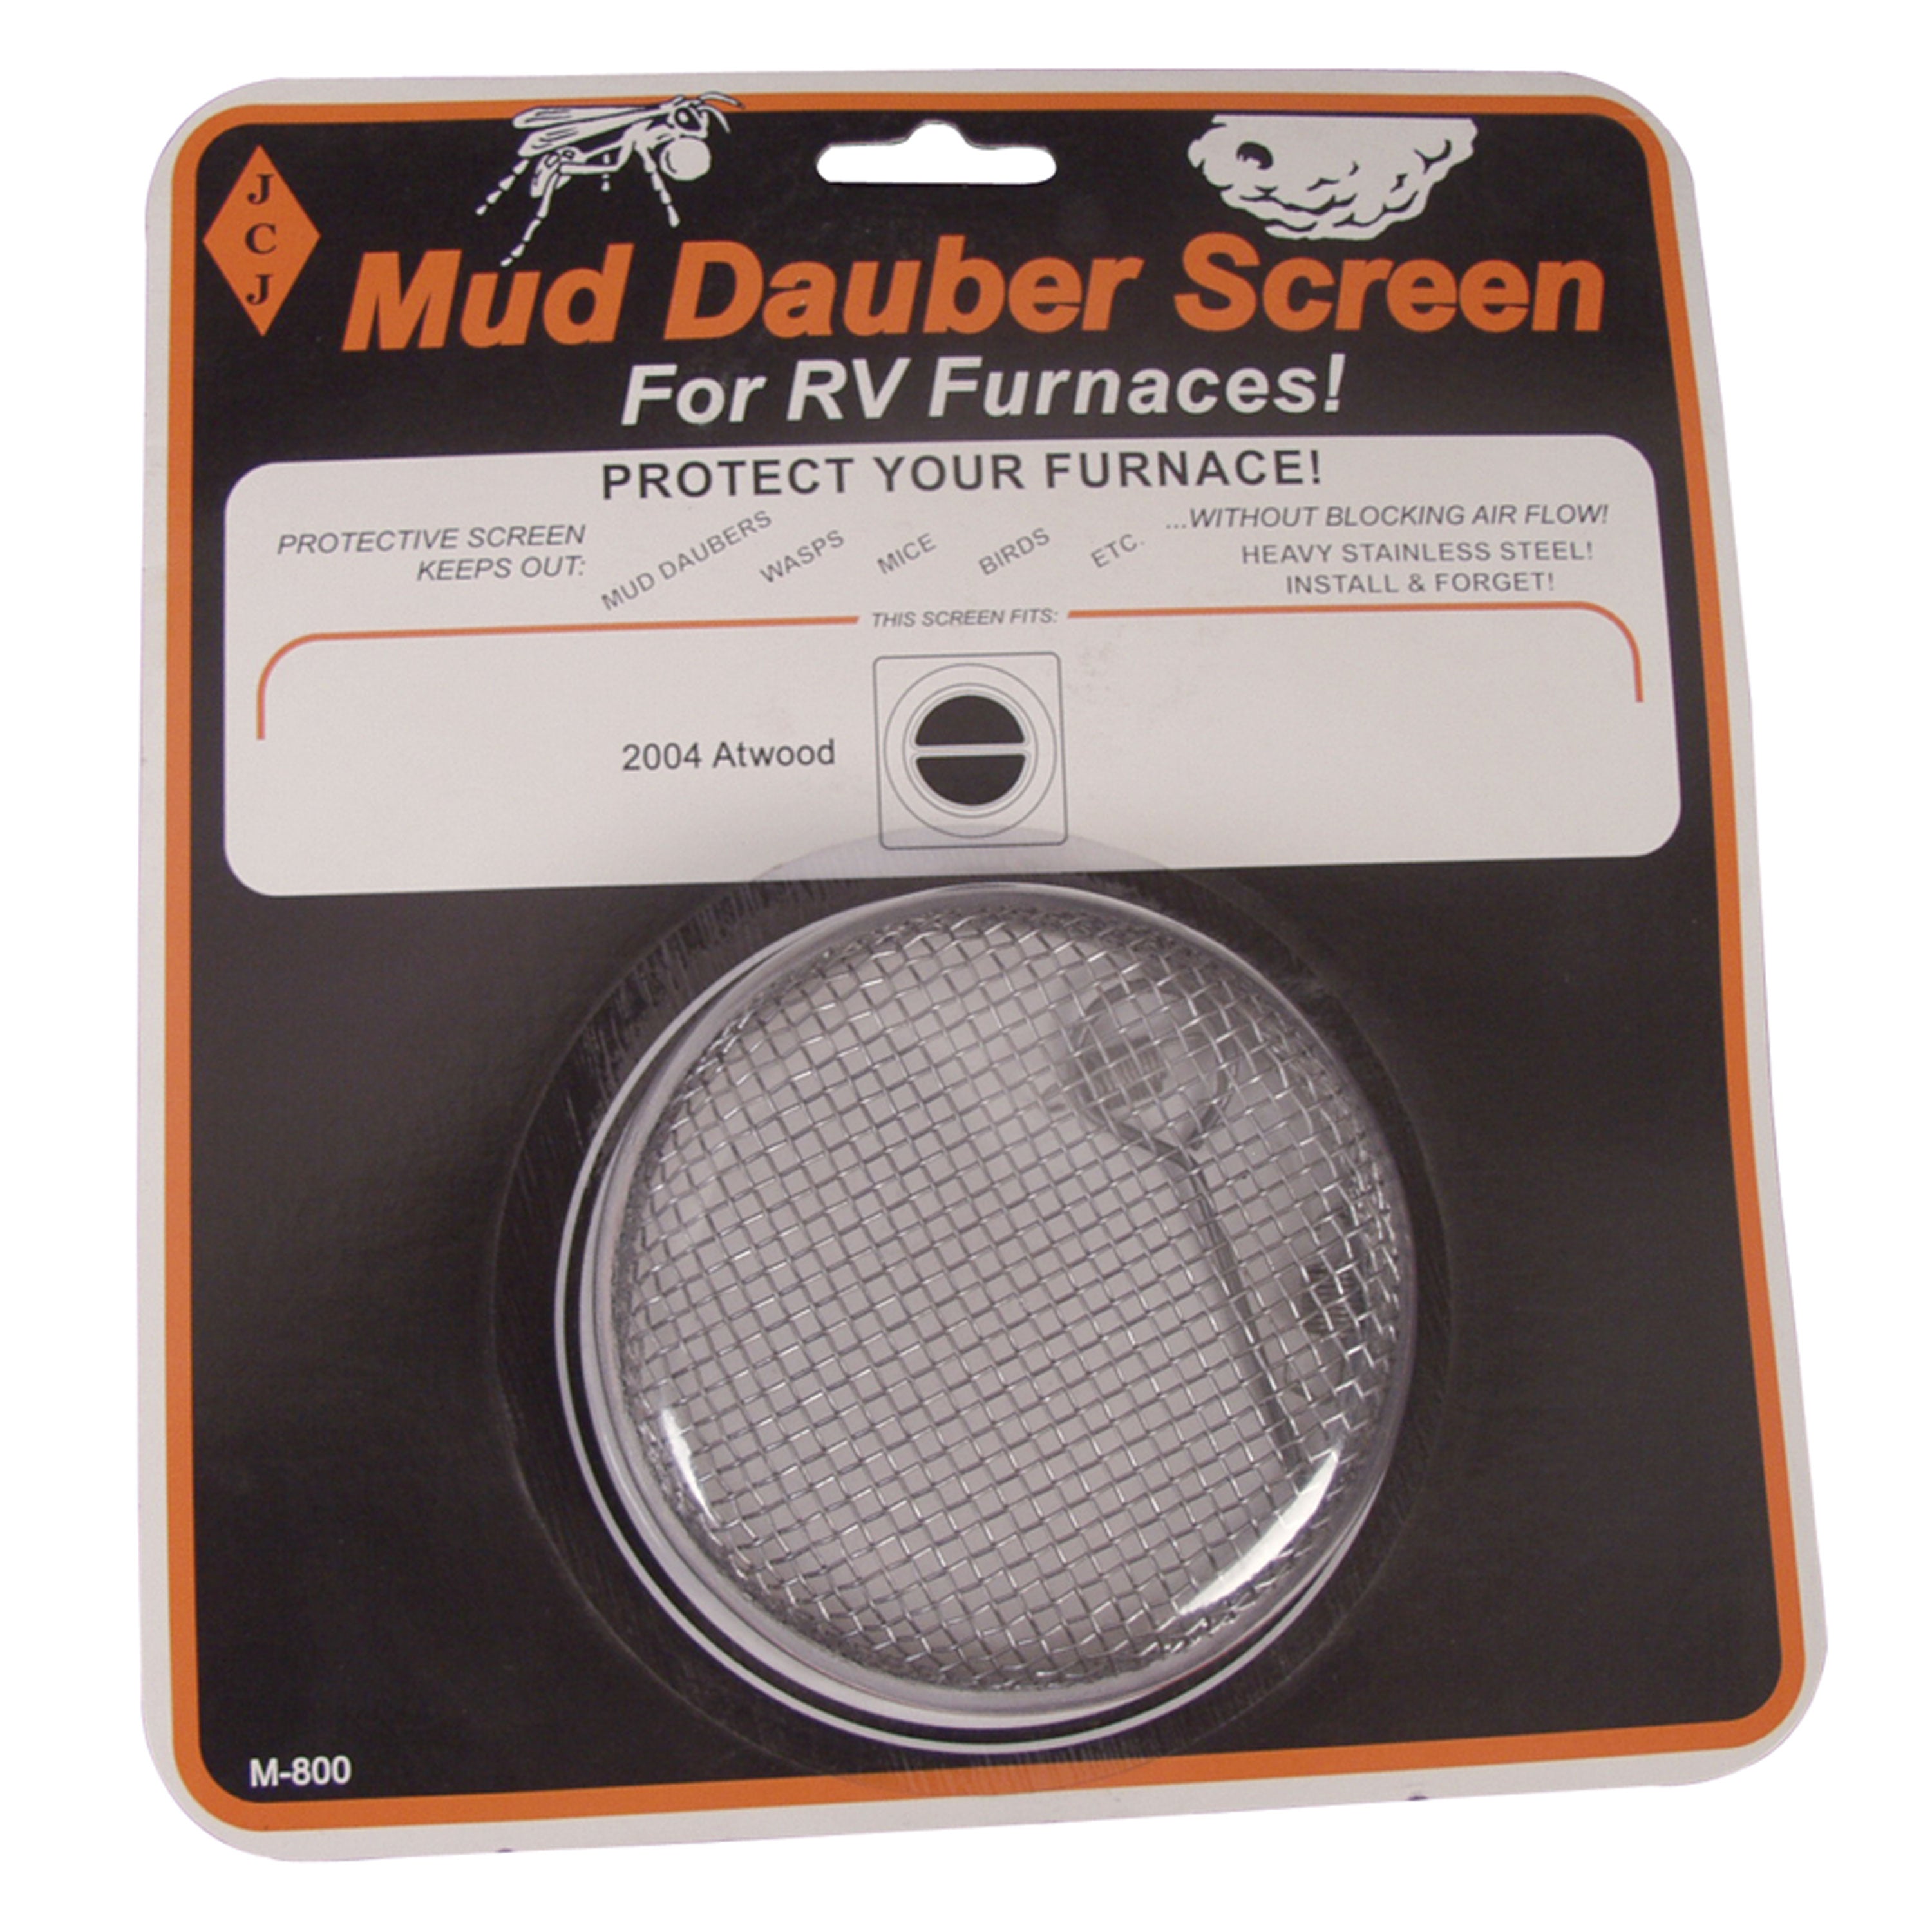 JCJ M-800 Mud Dauber Screens for RV Furnace and Fan Unit Outside Fittings - M800: For Atwood 2004 Models